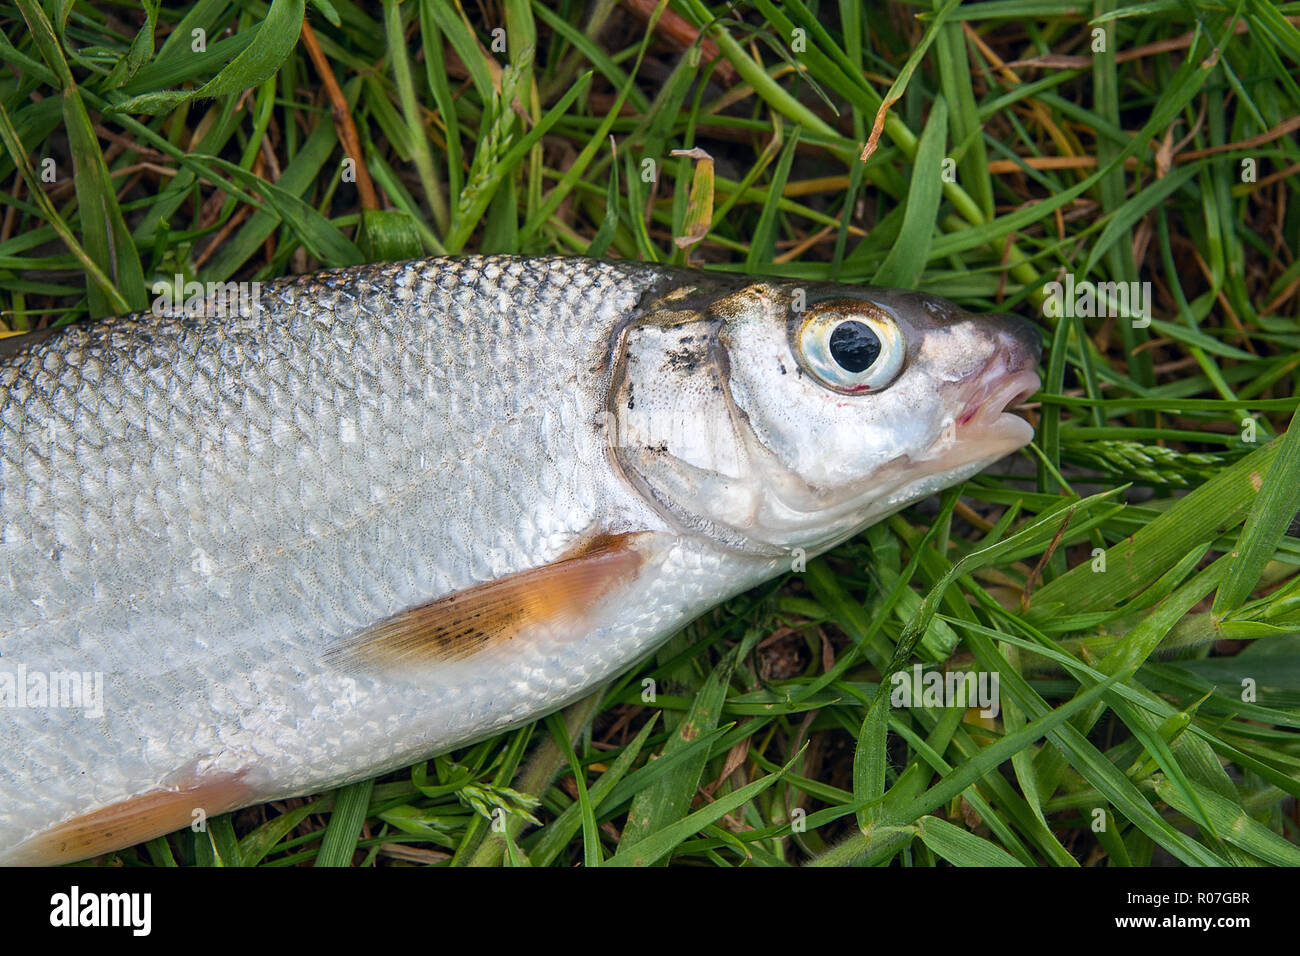 Close up view of just taken from the water freshwater common nase fish known as European potamodromous cyprinid fish on green grass. Stock Photo